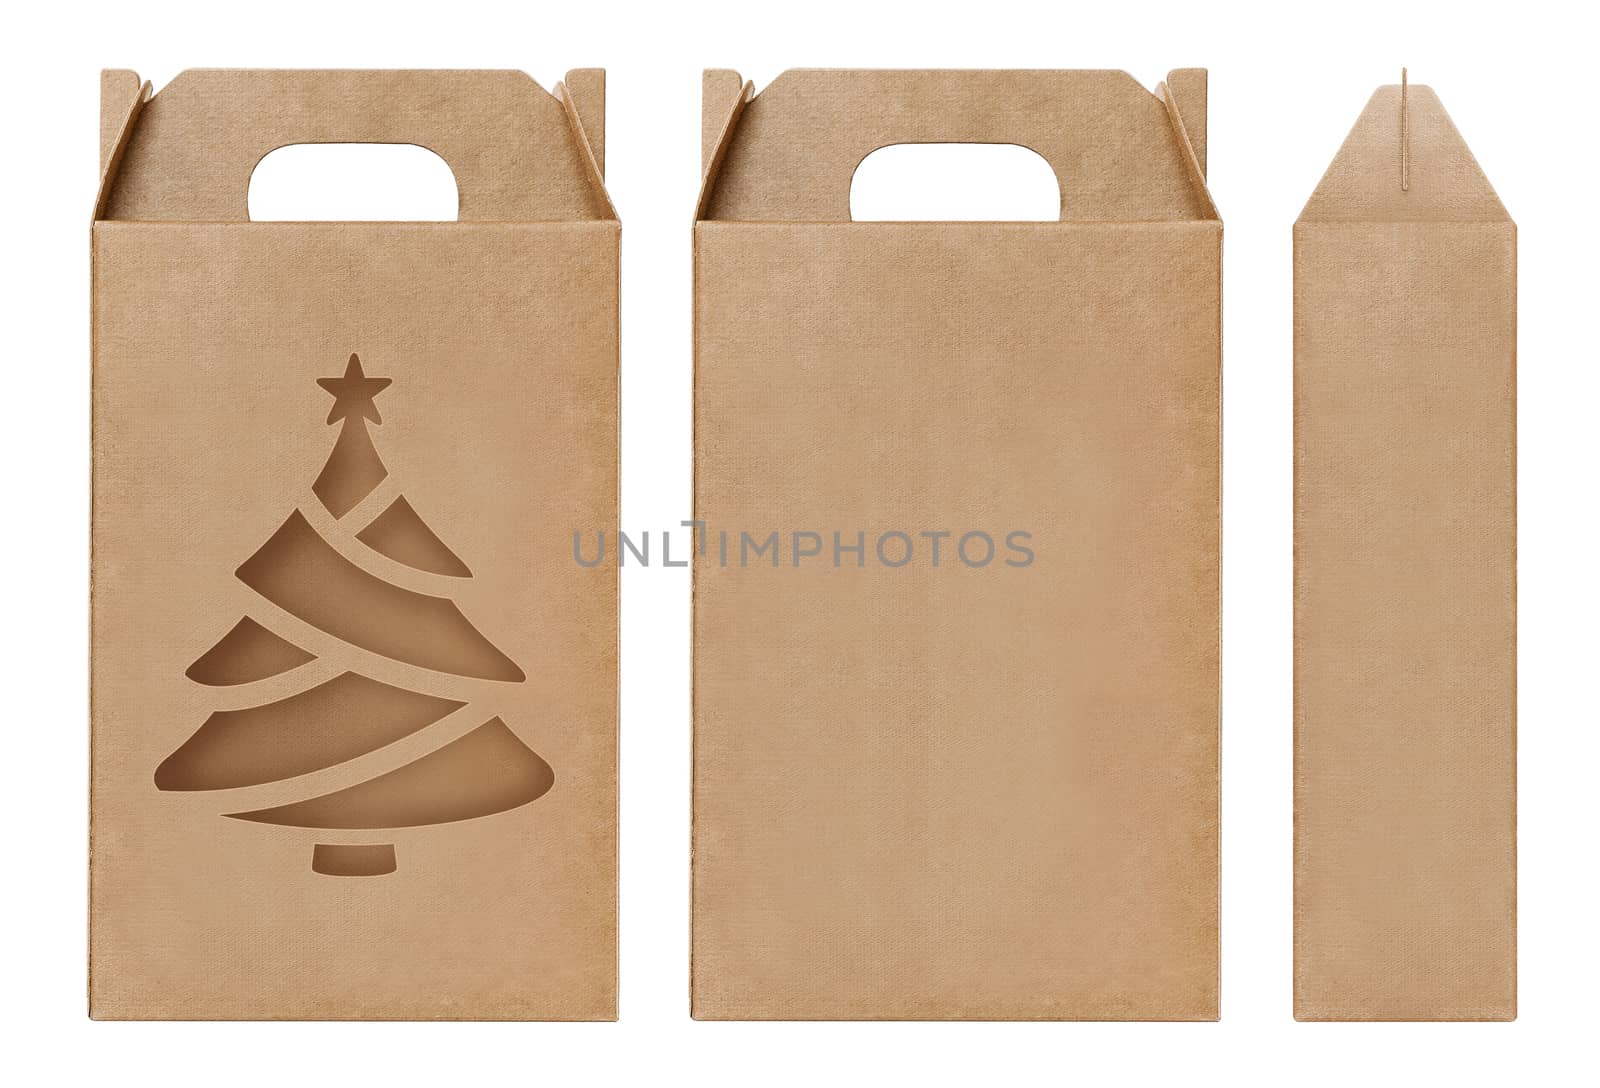 Box brown window Christmas tree shape cut out Packaging template, Empty kraft Box Cardboard isolated white background, Boxes Paper kraft natural material, Gift Box Brown Paper from Industrial Packaging carton by cgdeaw